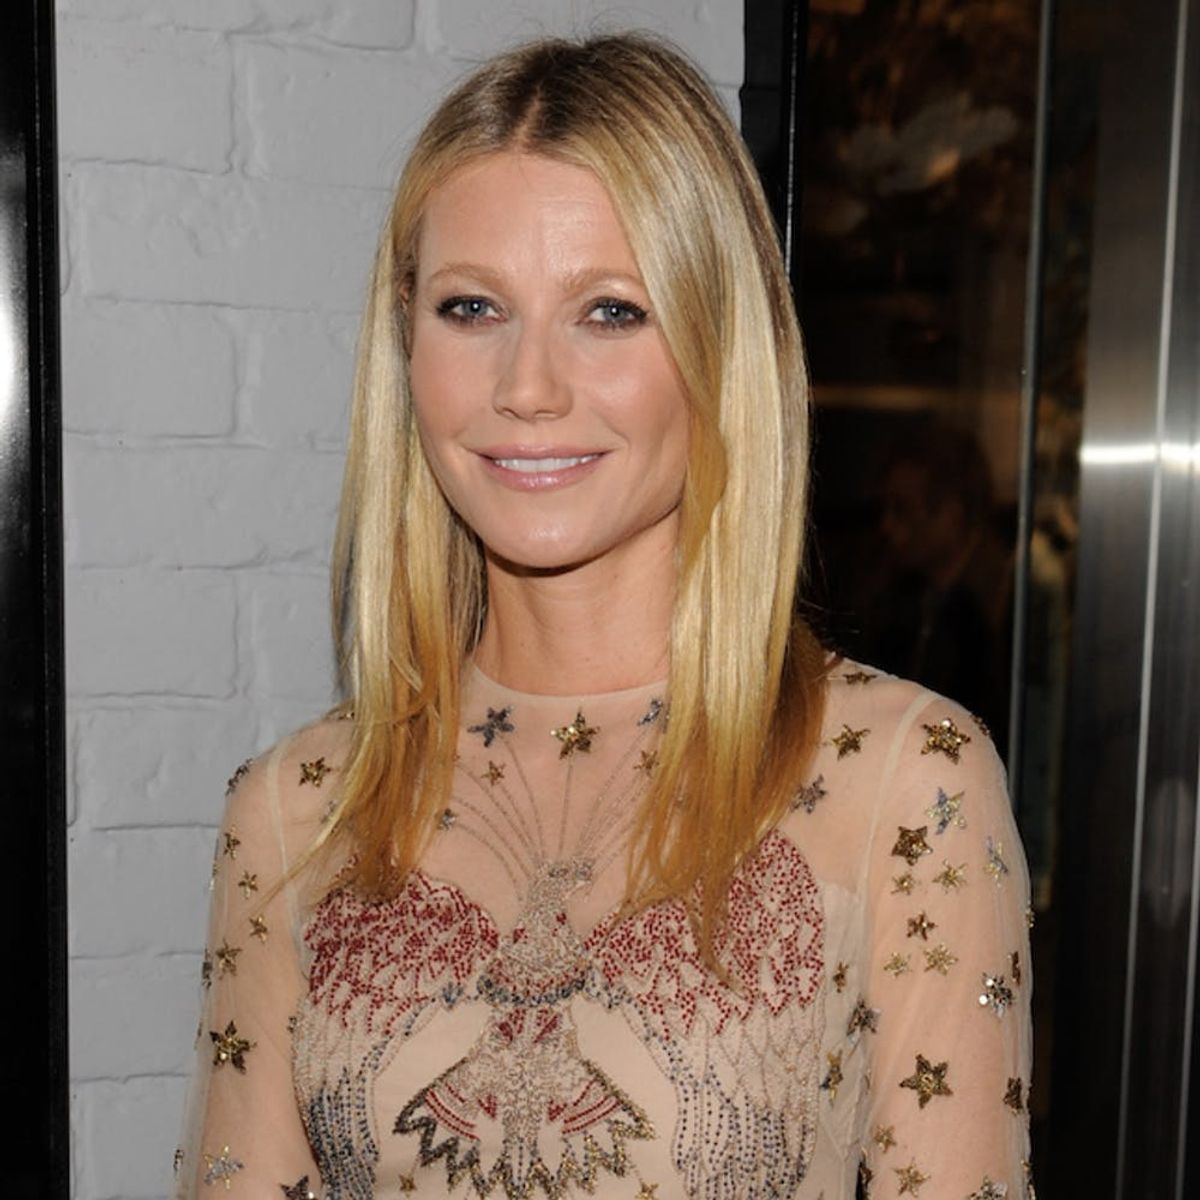 Gwyneth Paltrow Just Stayed in the $40,000 Airbnb Rental of Your Dreams